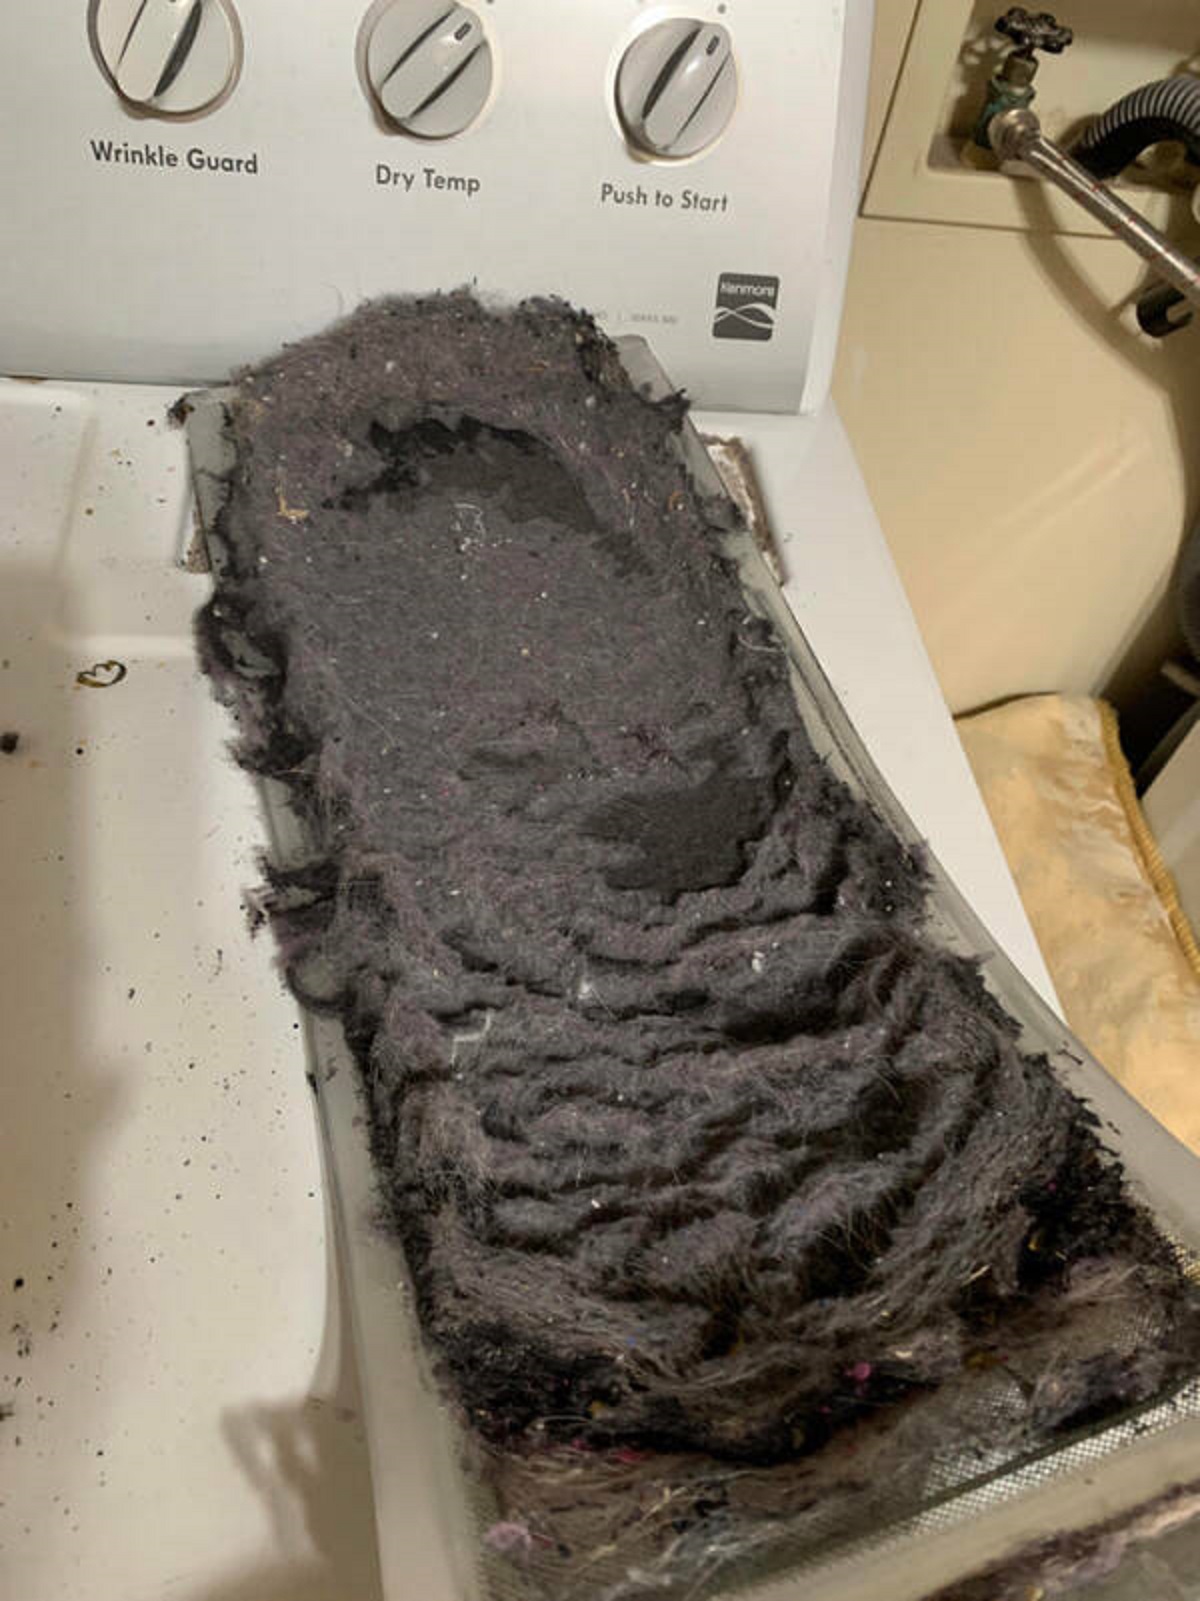 “My sister called and asked why her dryer kept stopping.”